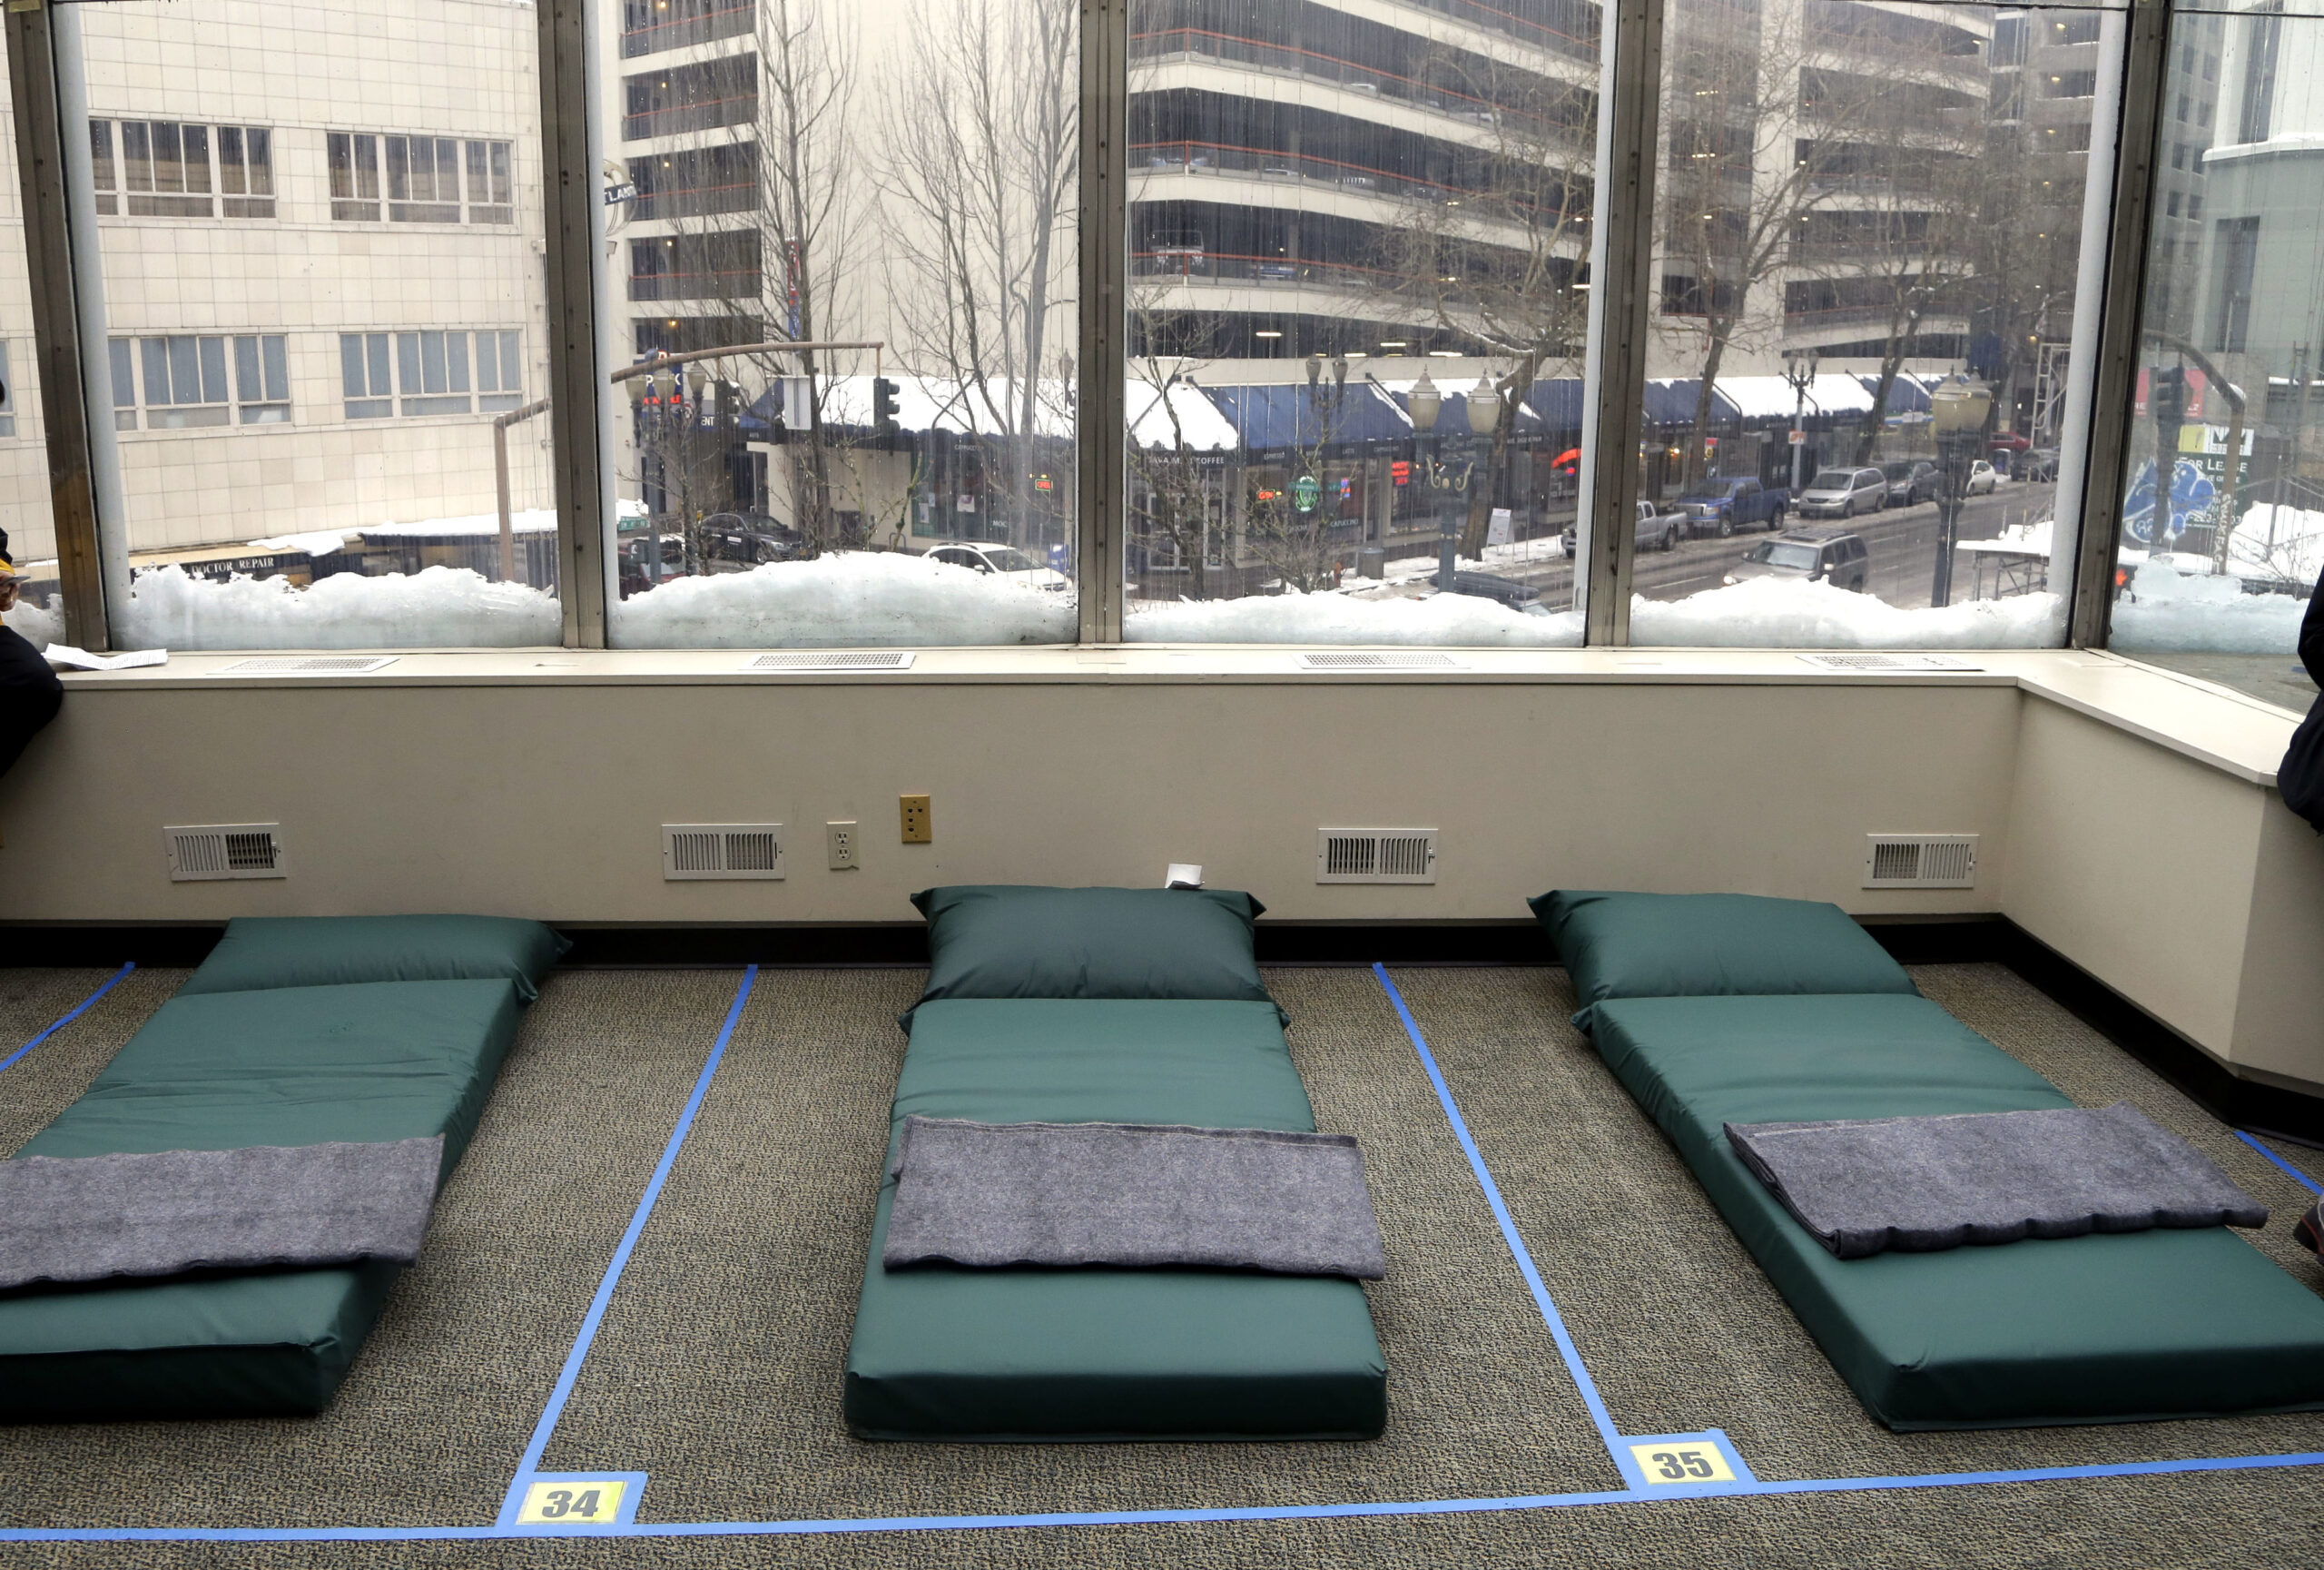 Beds in a homeless shelter are shown in Portland, Ore., Tuesday, Jan. 17, 2017